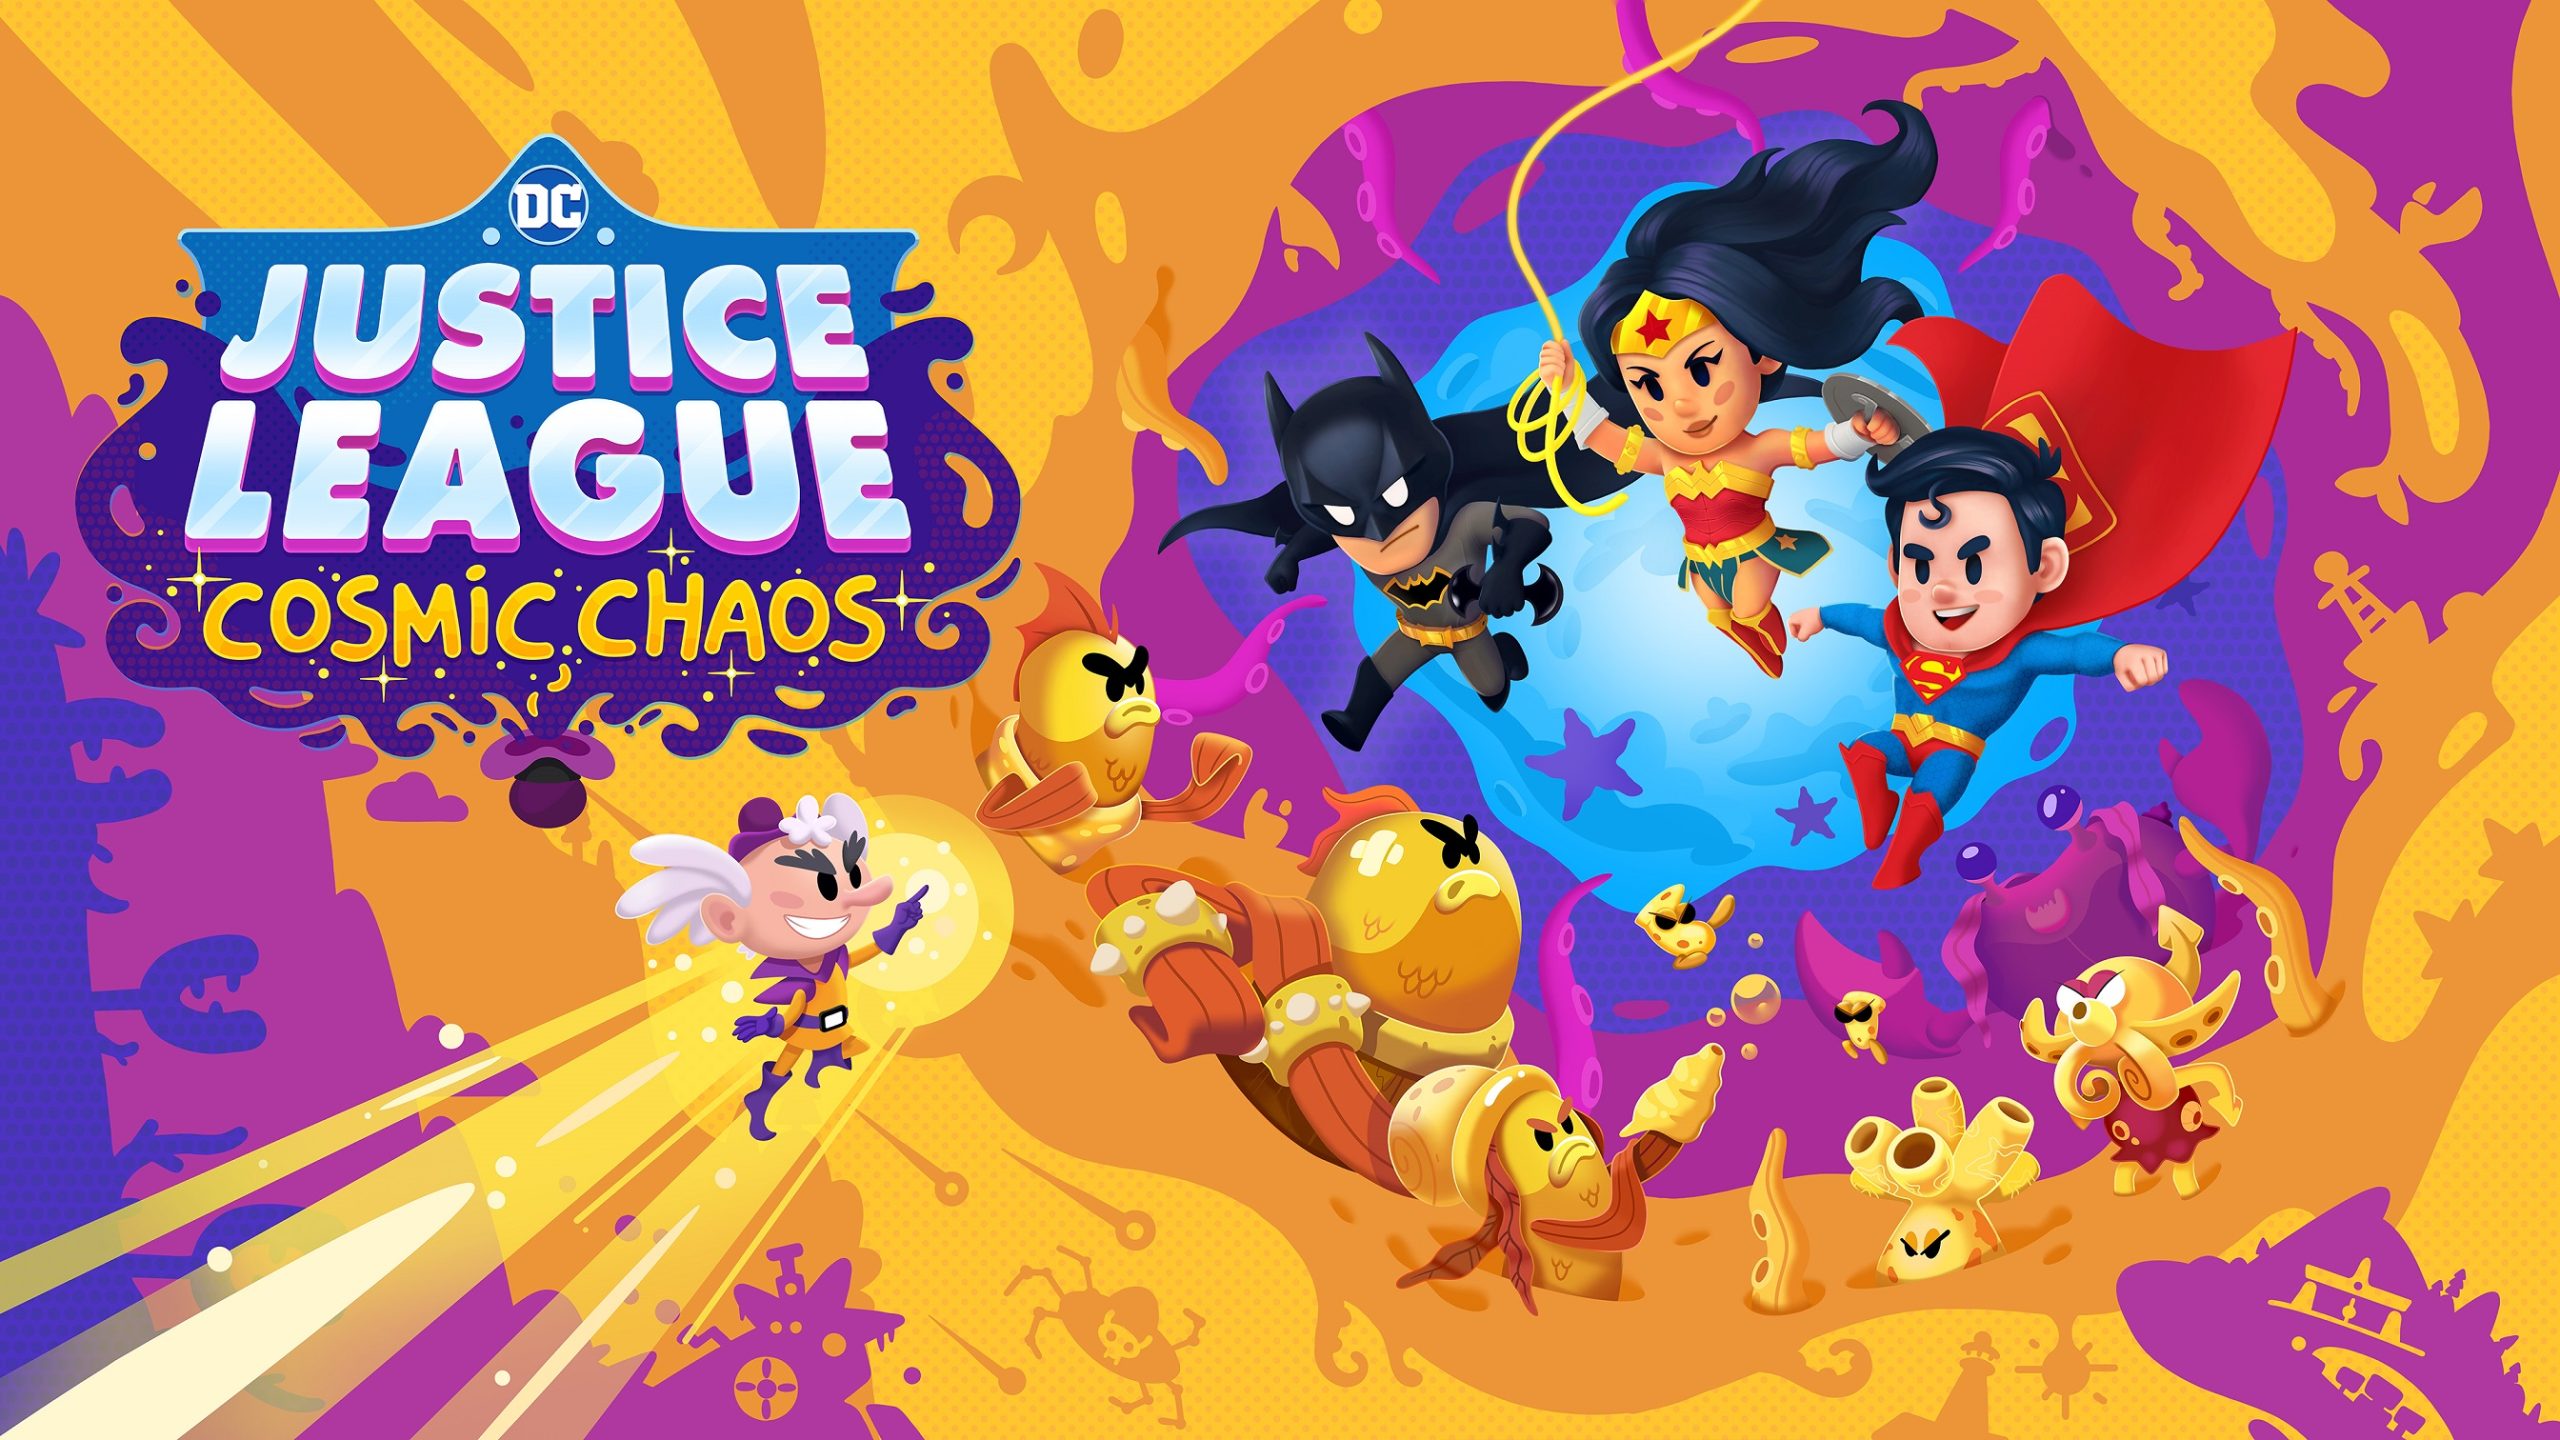 Uniting against chaos with the heroes of DC's Justice League: Cosmic Chaos